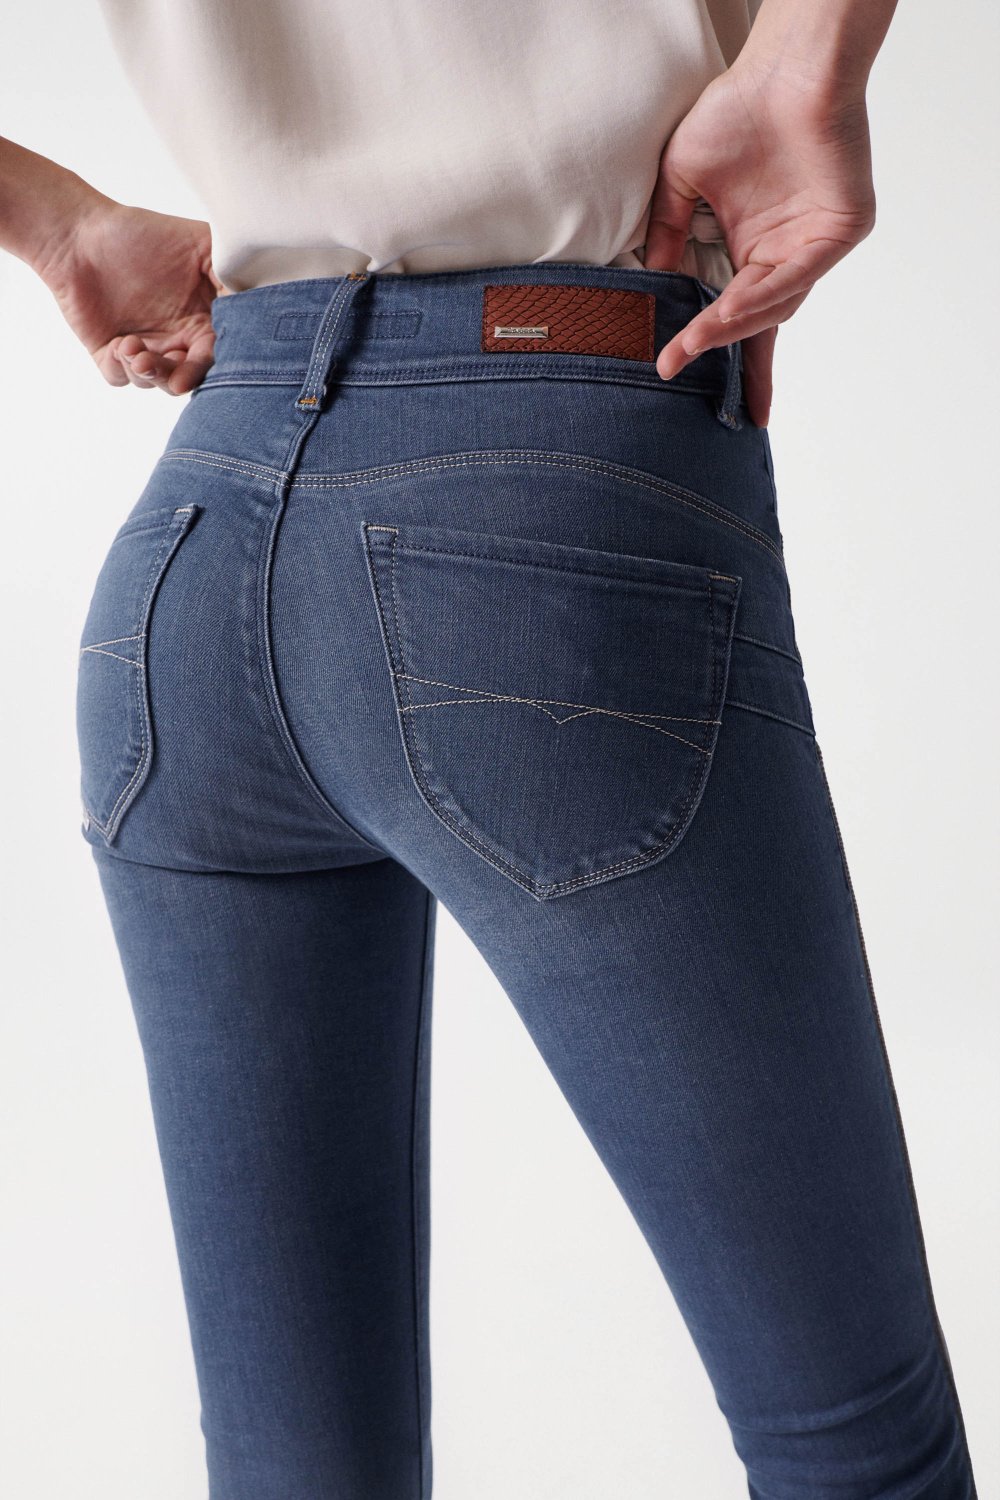 PUSH IN SECRET JEANS WITH STITCHING DETAIL ON THE LEG - Salsa